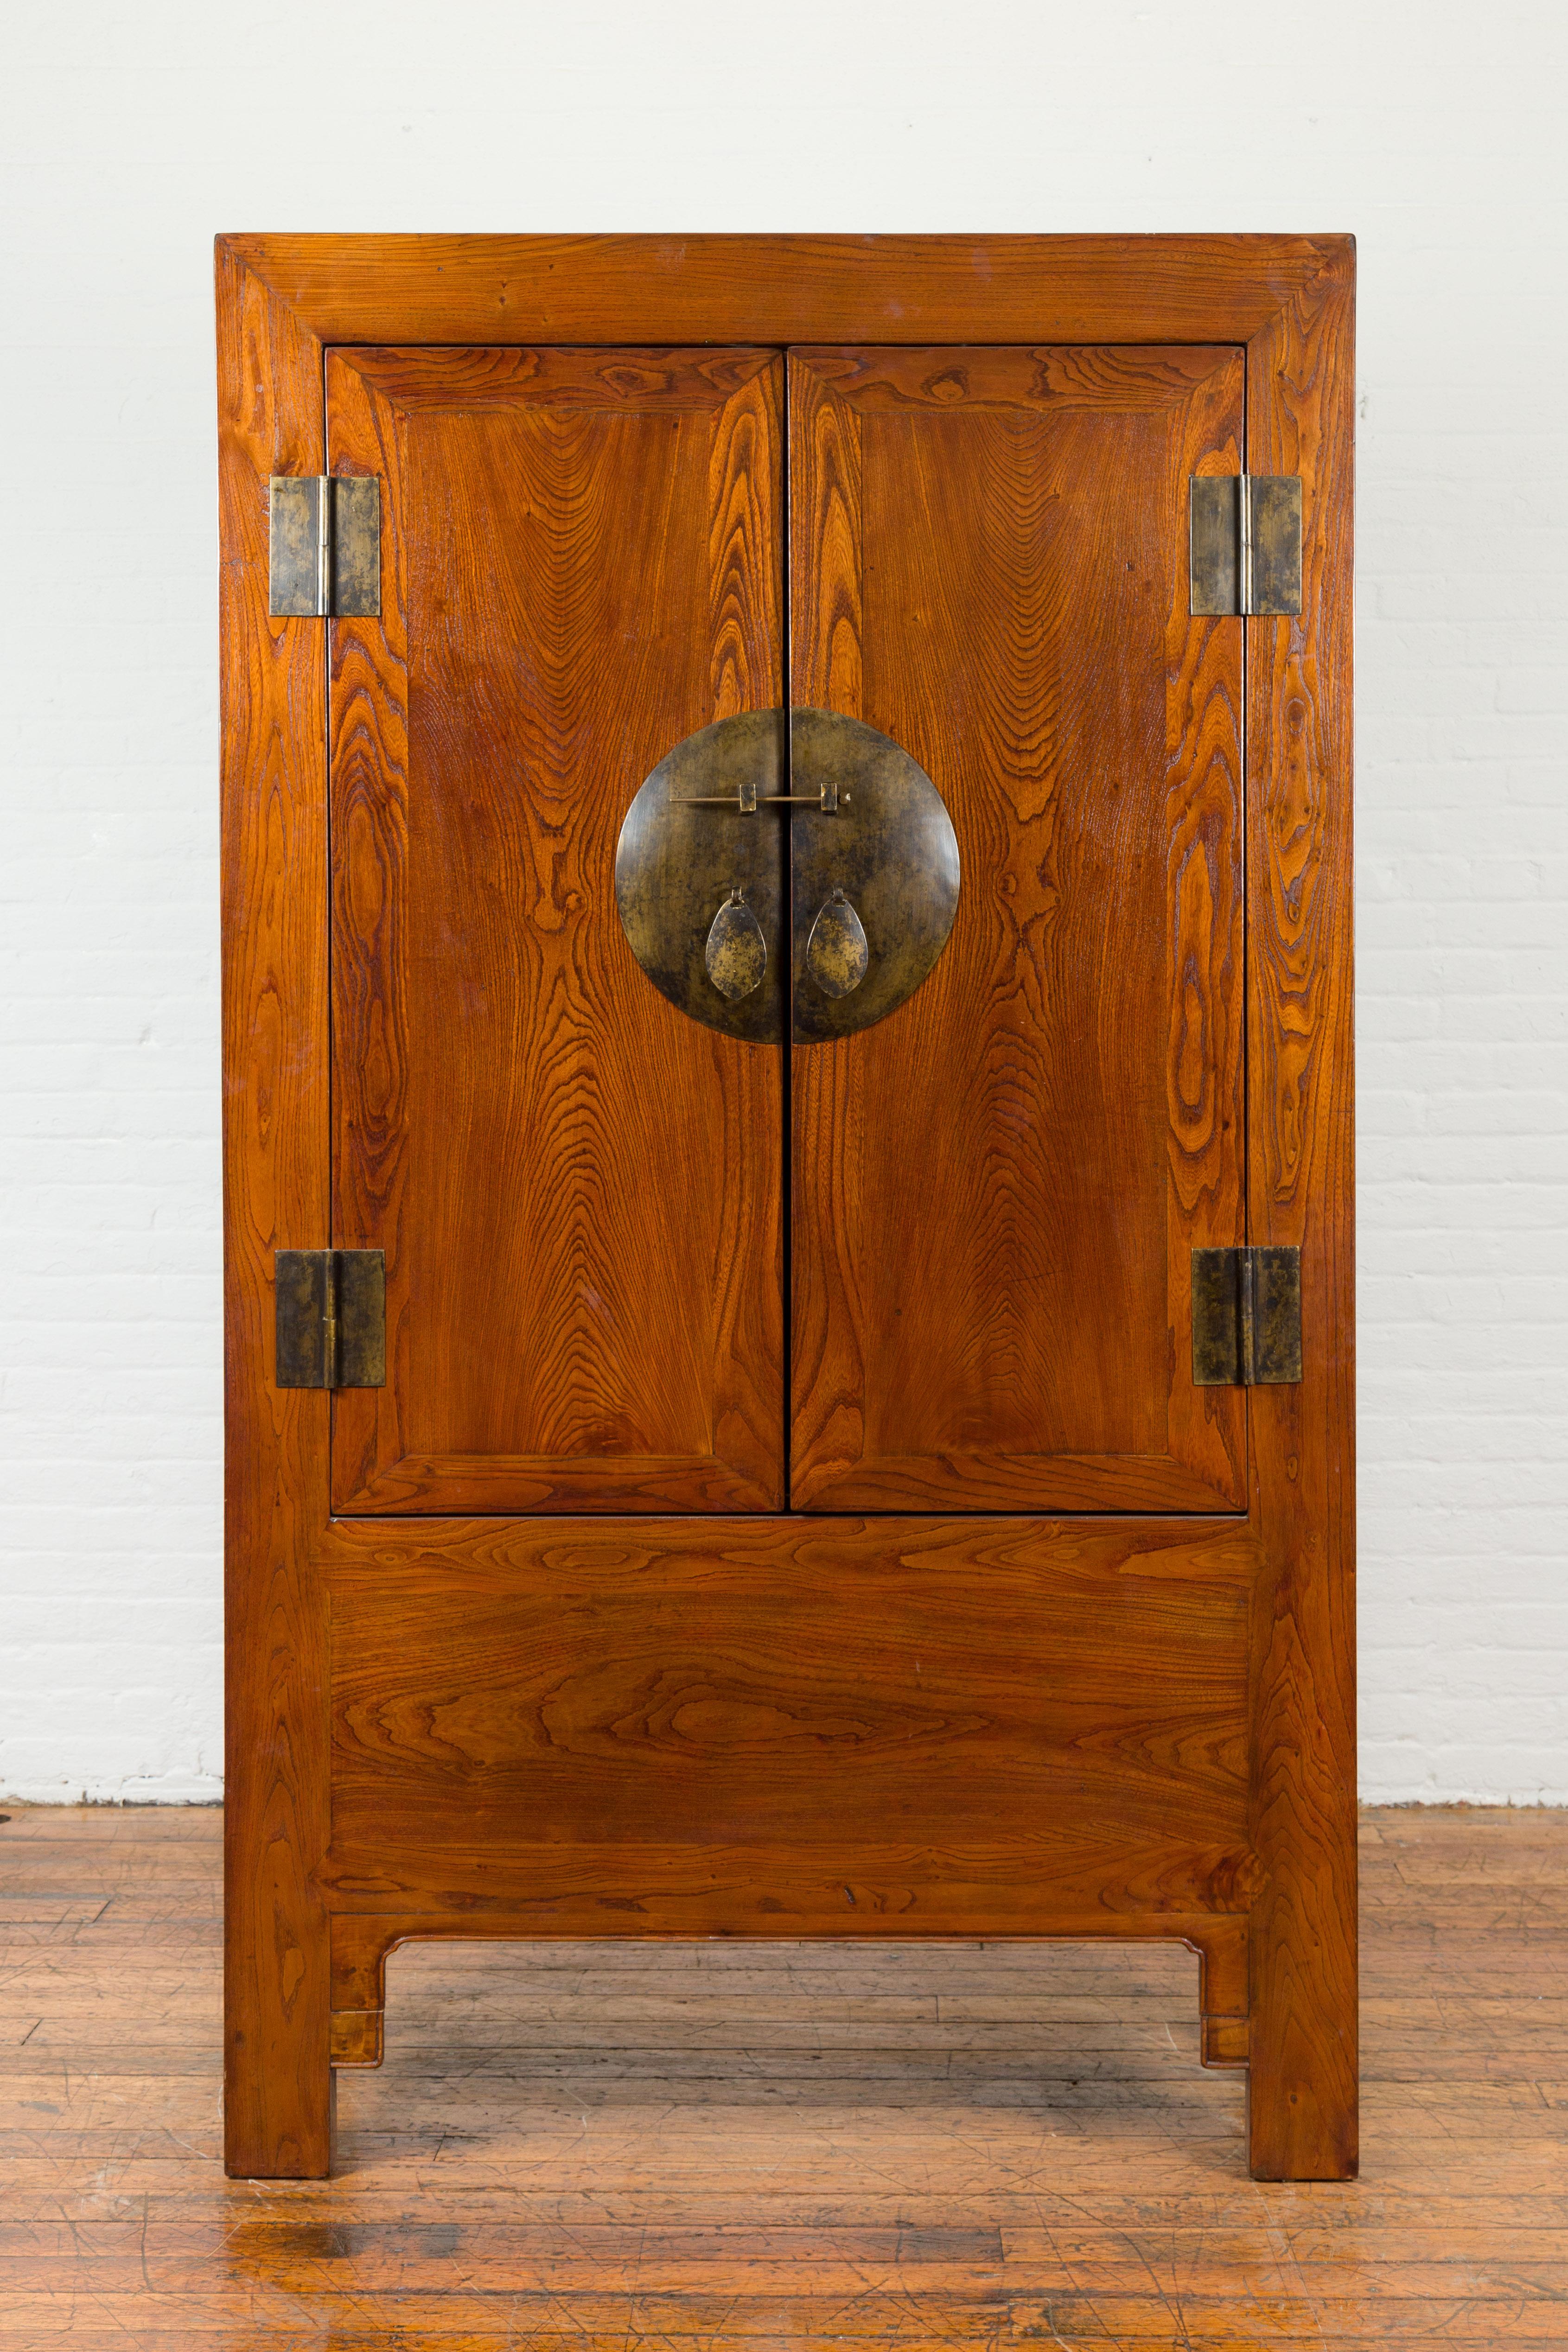 A Chinese Qing Dynasty period nicely grained cabinet from the 19th century, with medallion hardware. Created in China during the Qing Dynasty, this wooden cabinet features a linear silhouette perfectly complimented by a warm brown patina. The façade